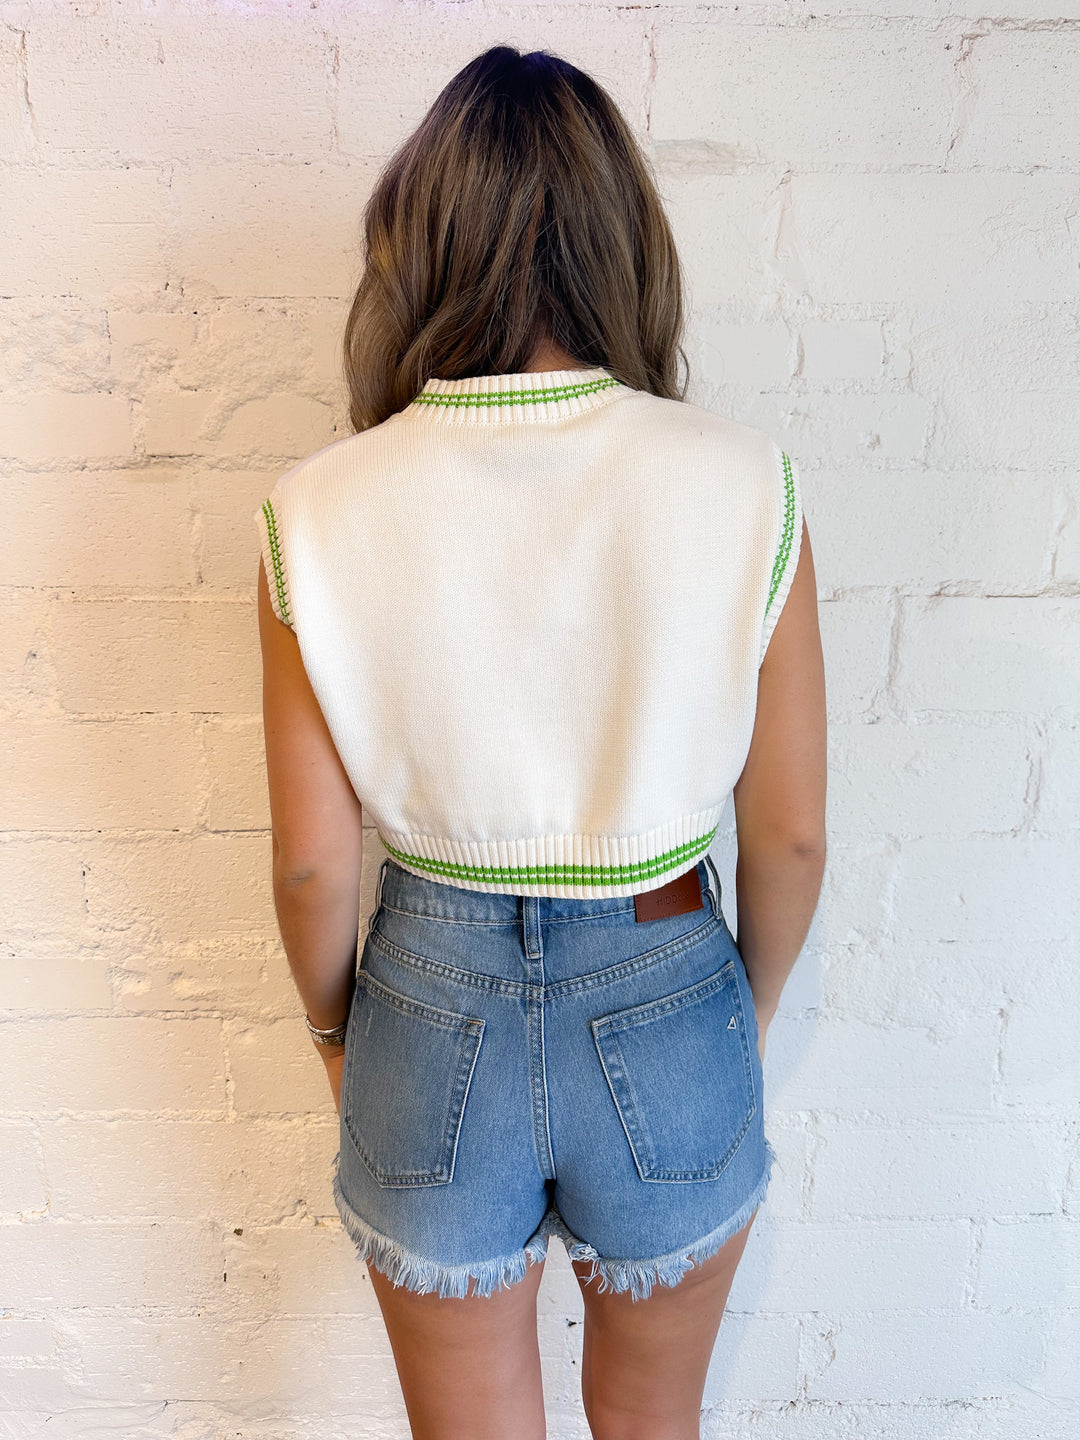 Spring Greens Sweater Vest, Tops, Olivaceous, Adeline, dallas boutique, dallas texas, texas boutique, women's boutique dallas, adeline boutique, dallas boutique, trendy boutique, affordable boutique